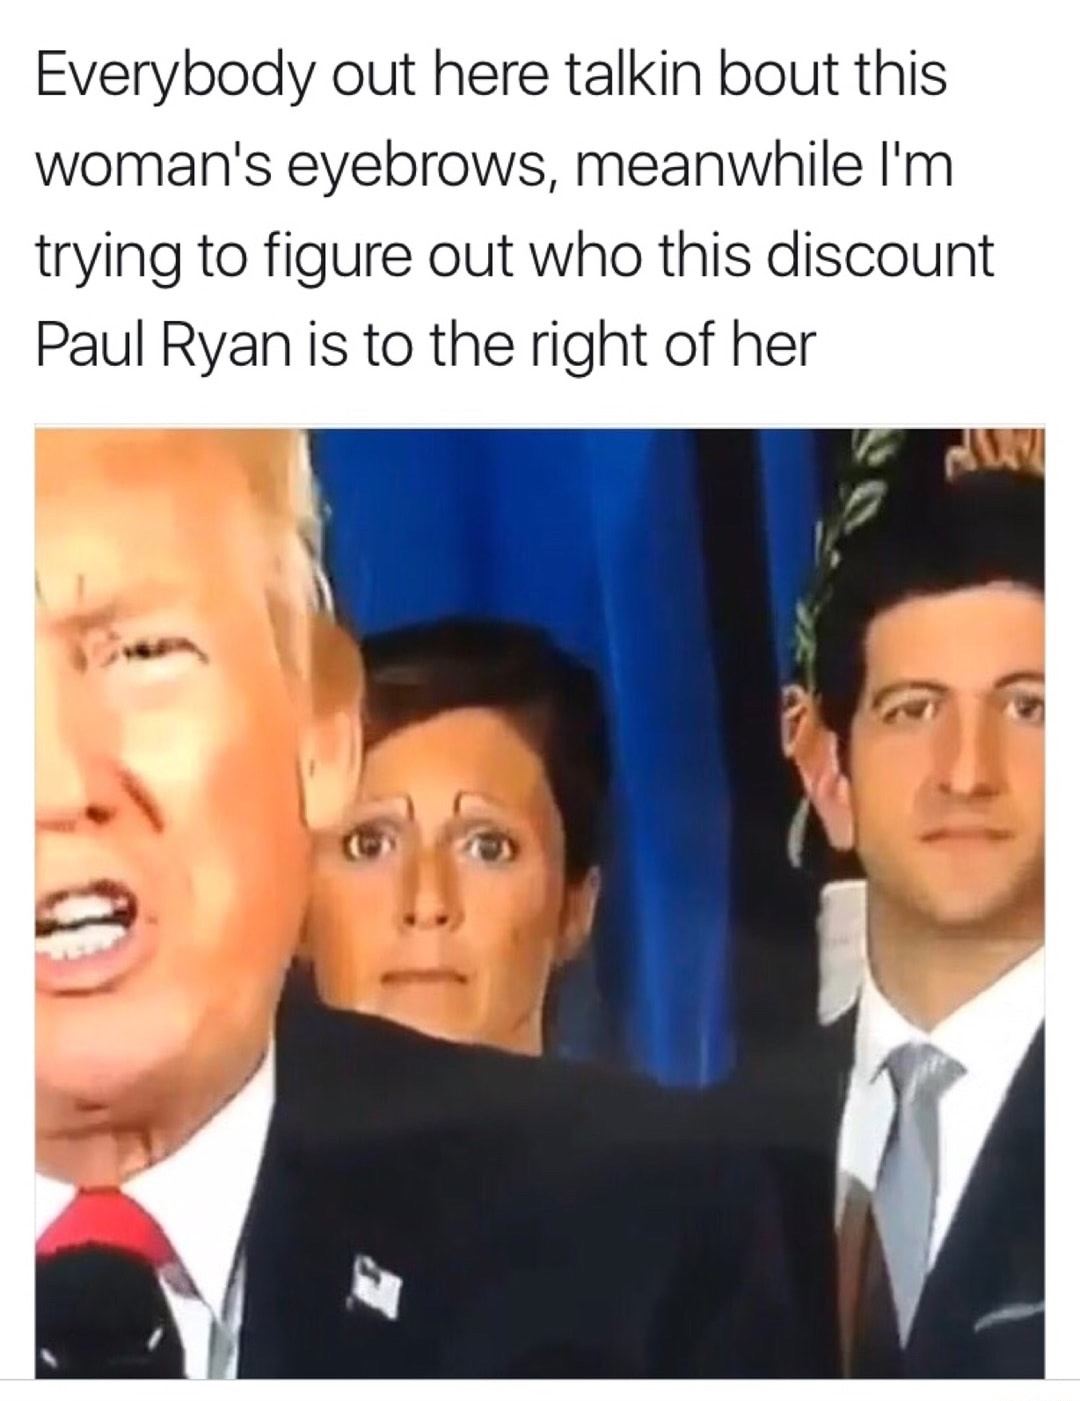 donald trump eyebrow lady - Everybody out here talkin bout this woman's eyebrows, meanwhile I'm trying to figure out who this discount Paul Ryan is to the right of her